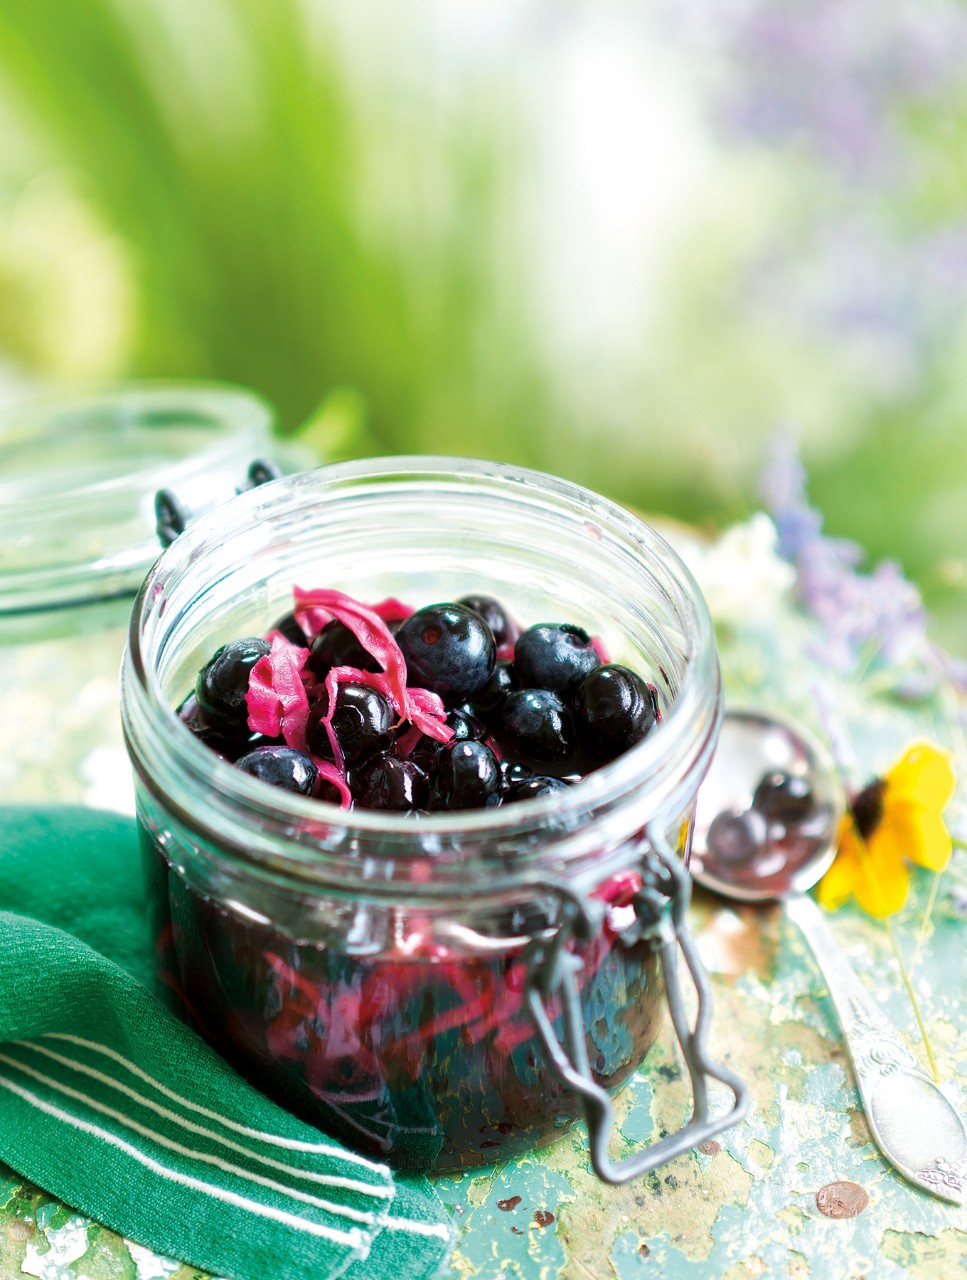 Pickled Blueberries with Shards of Red Cabbage